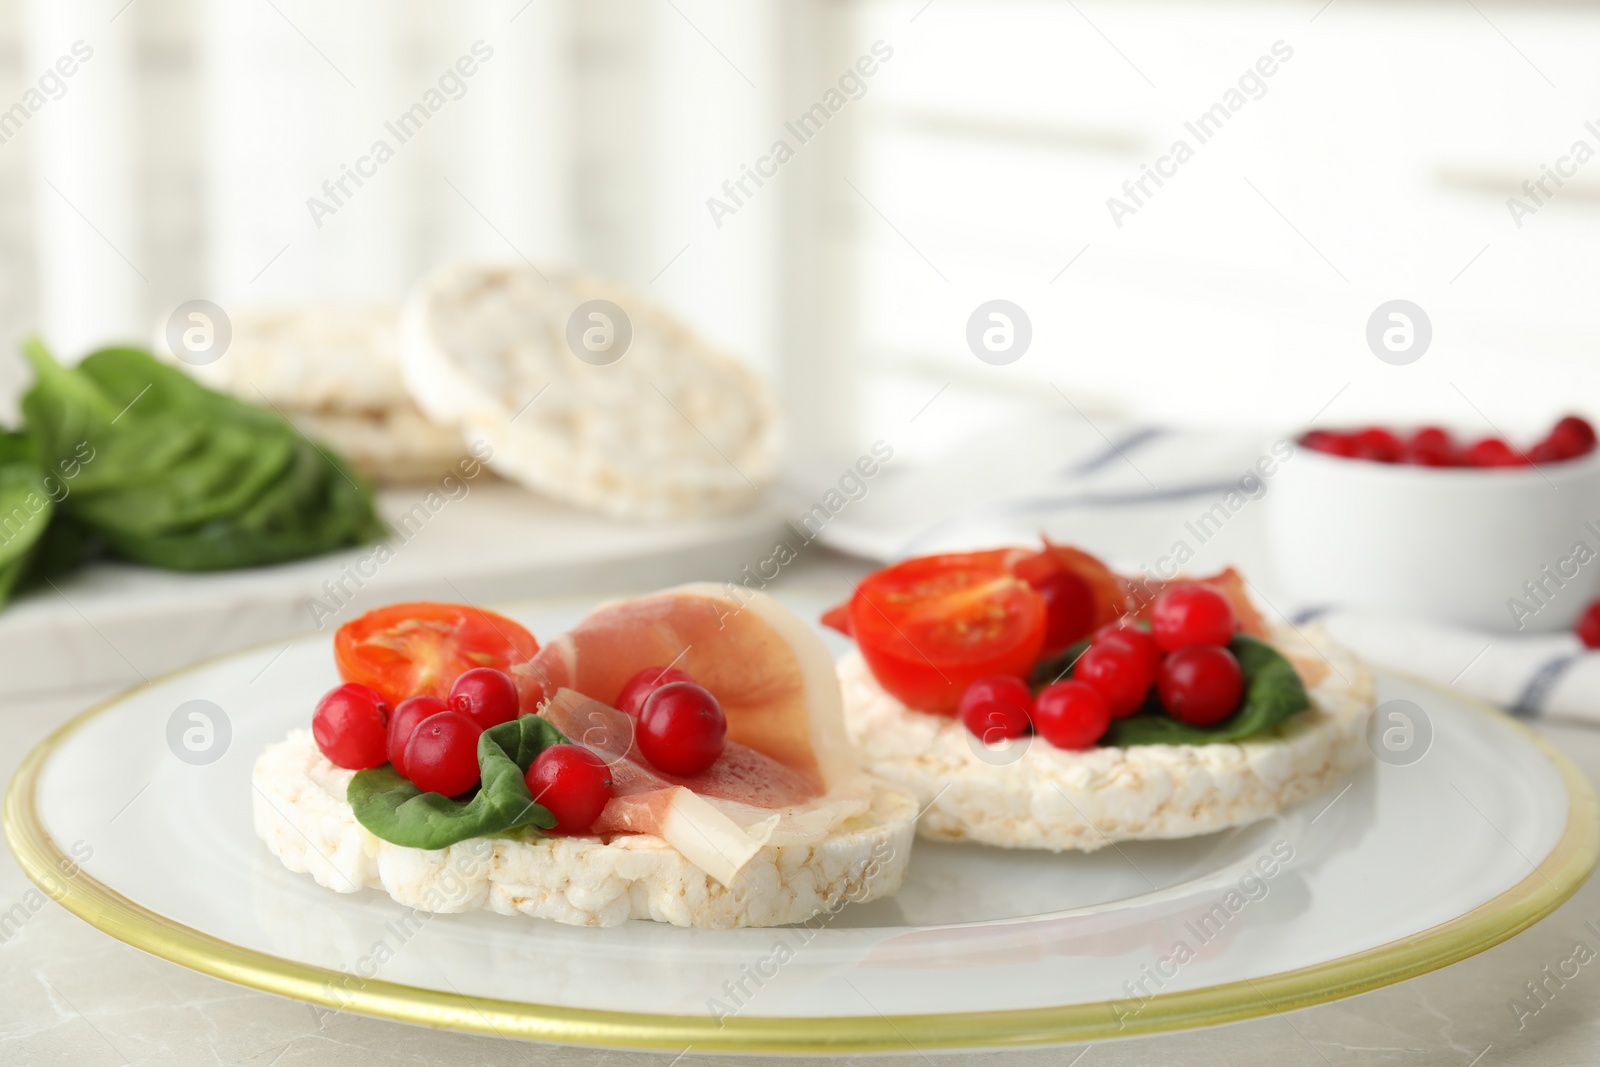 Photo of Puffed rice cakes with prosciutto, berries and basil on table, closeup